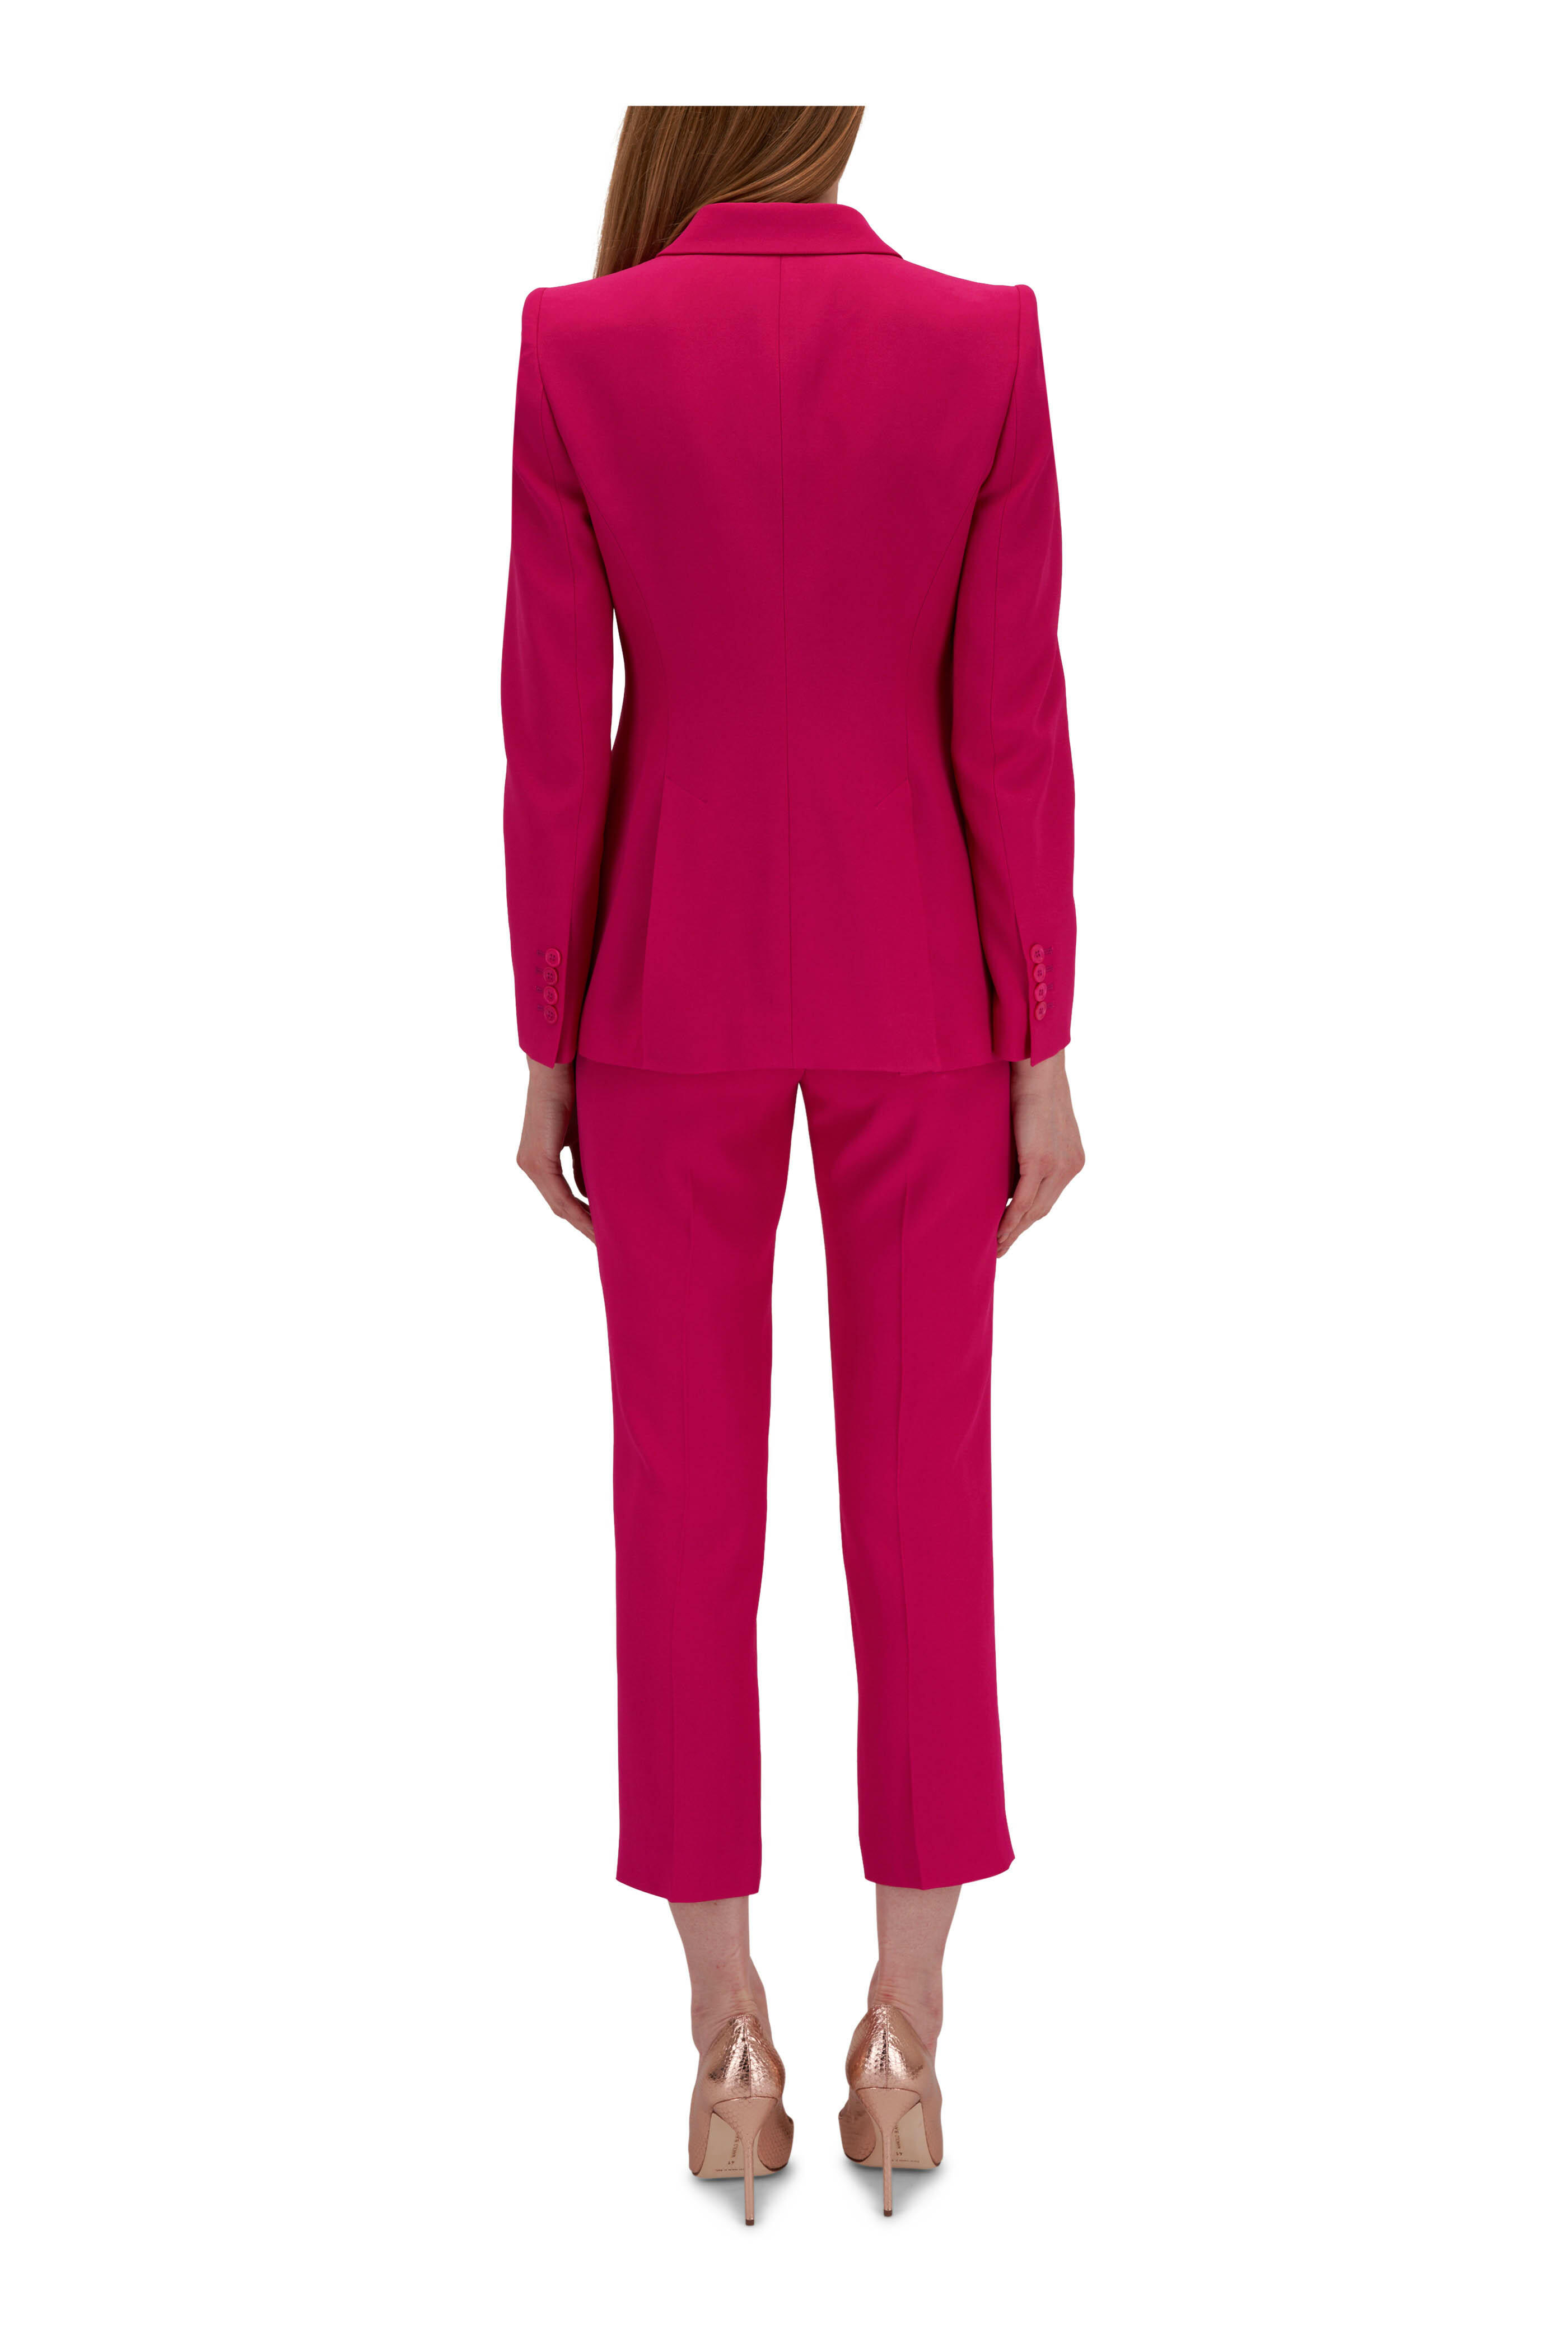 Alexander McQueen - Orchid Pink Leaf Crepe Cropped Dress Pant